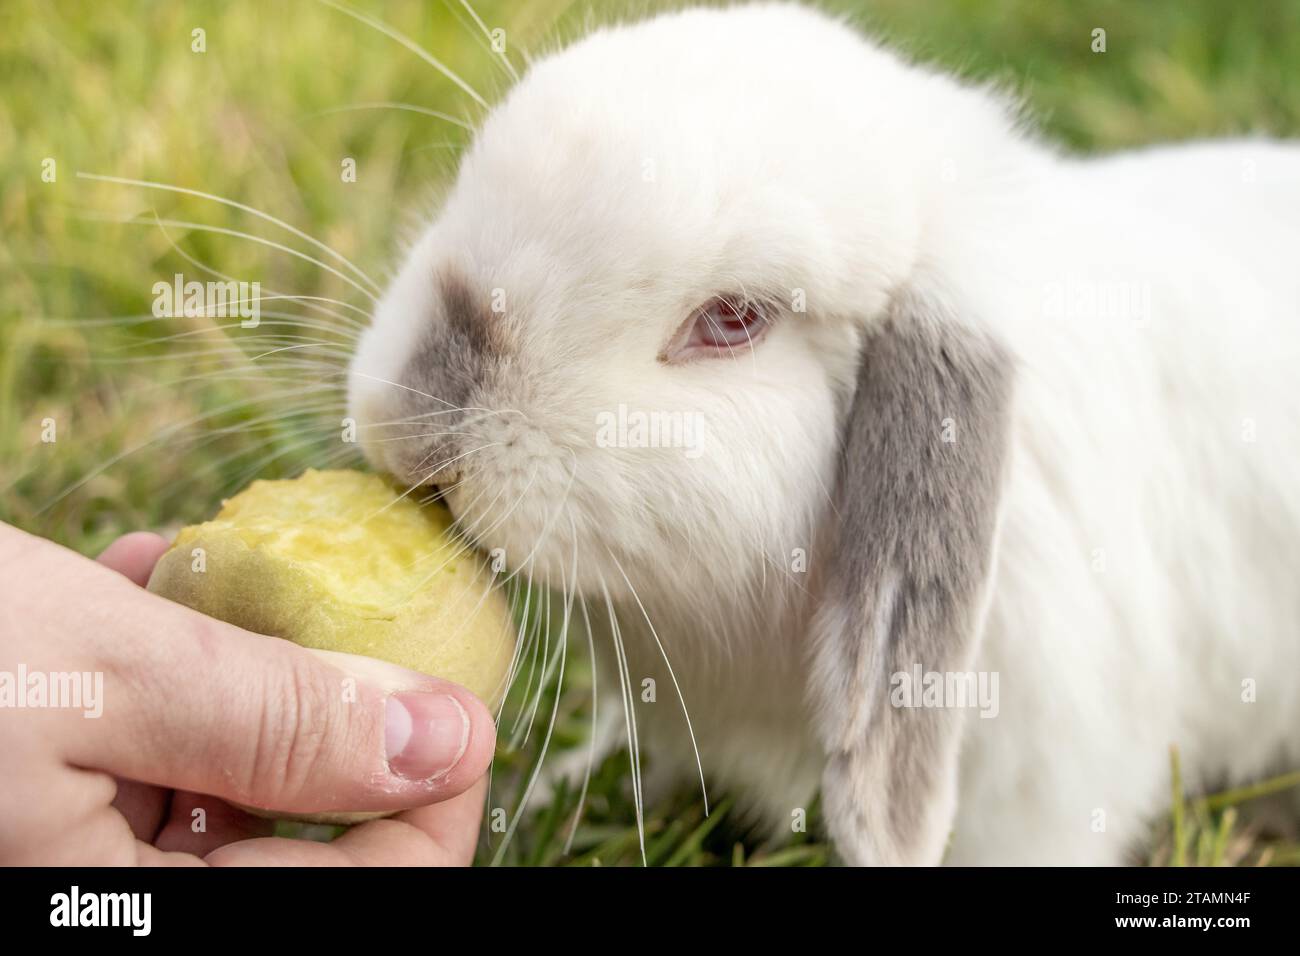 White Holland Lop Rabbit Bunny Albino Californian Siamese Red Eyes Flop Ear Close Up Eating Peach Nibbling Stock Photo